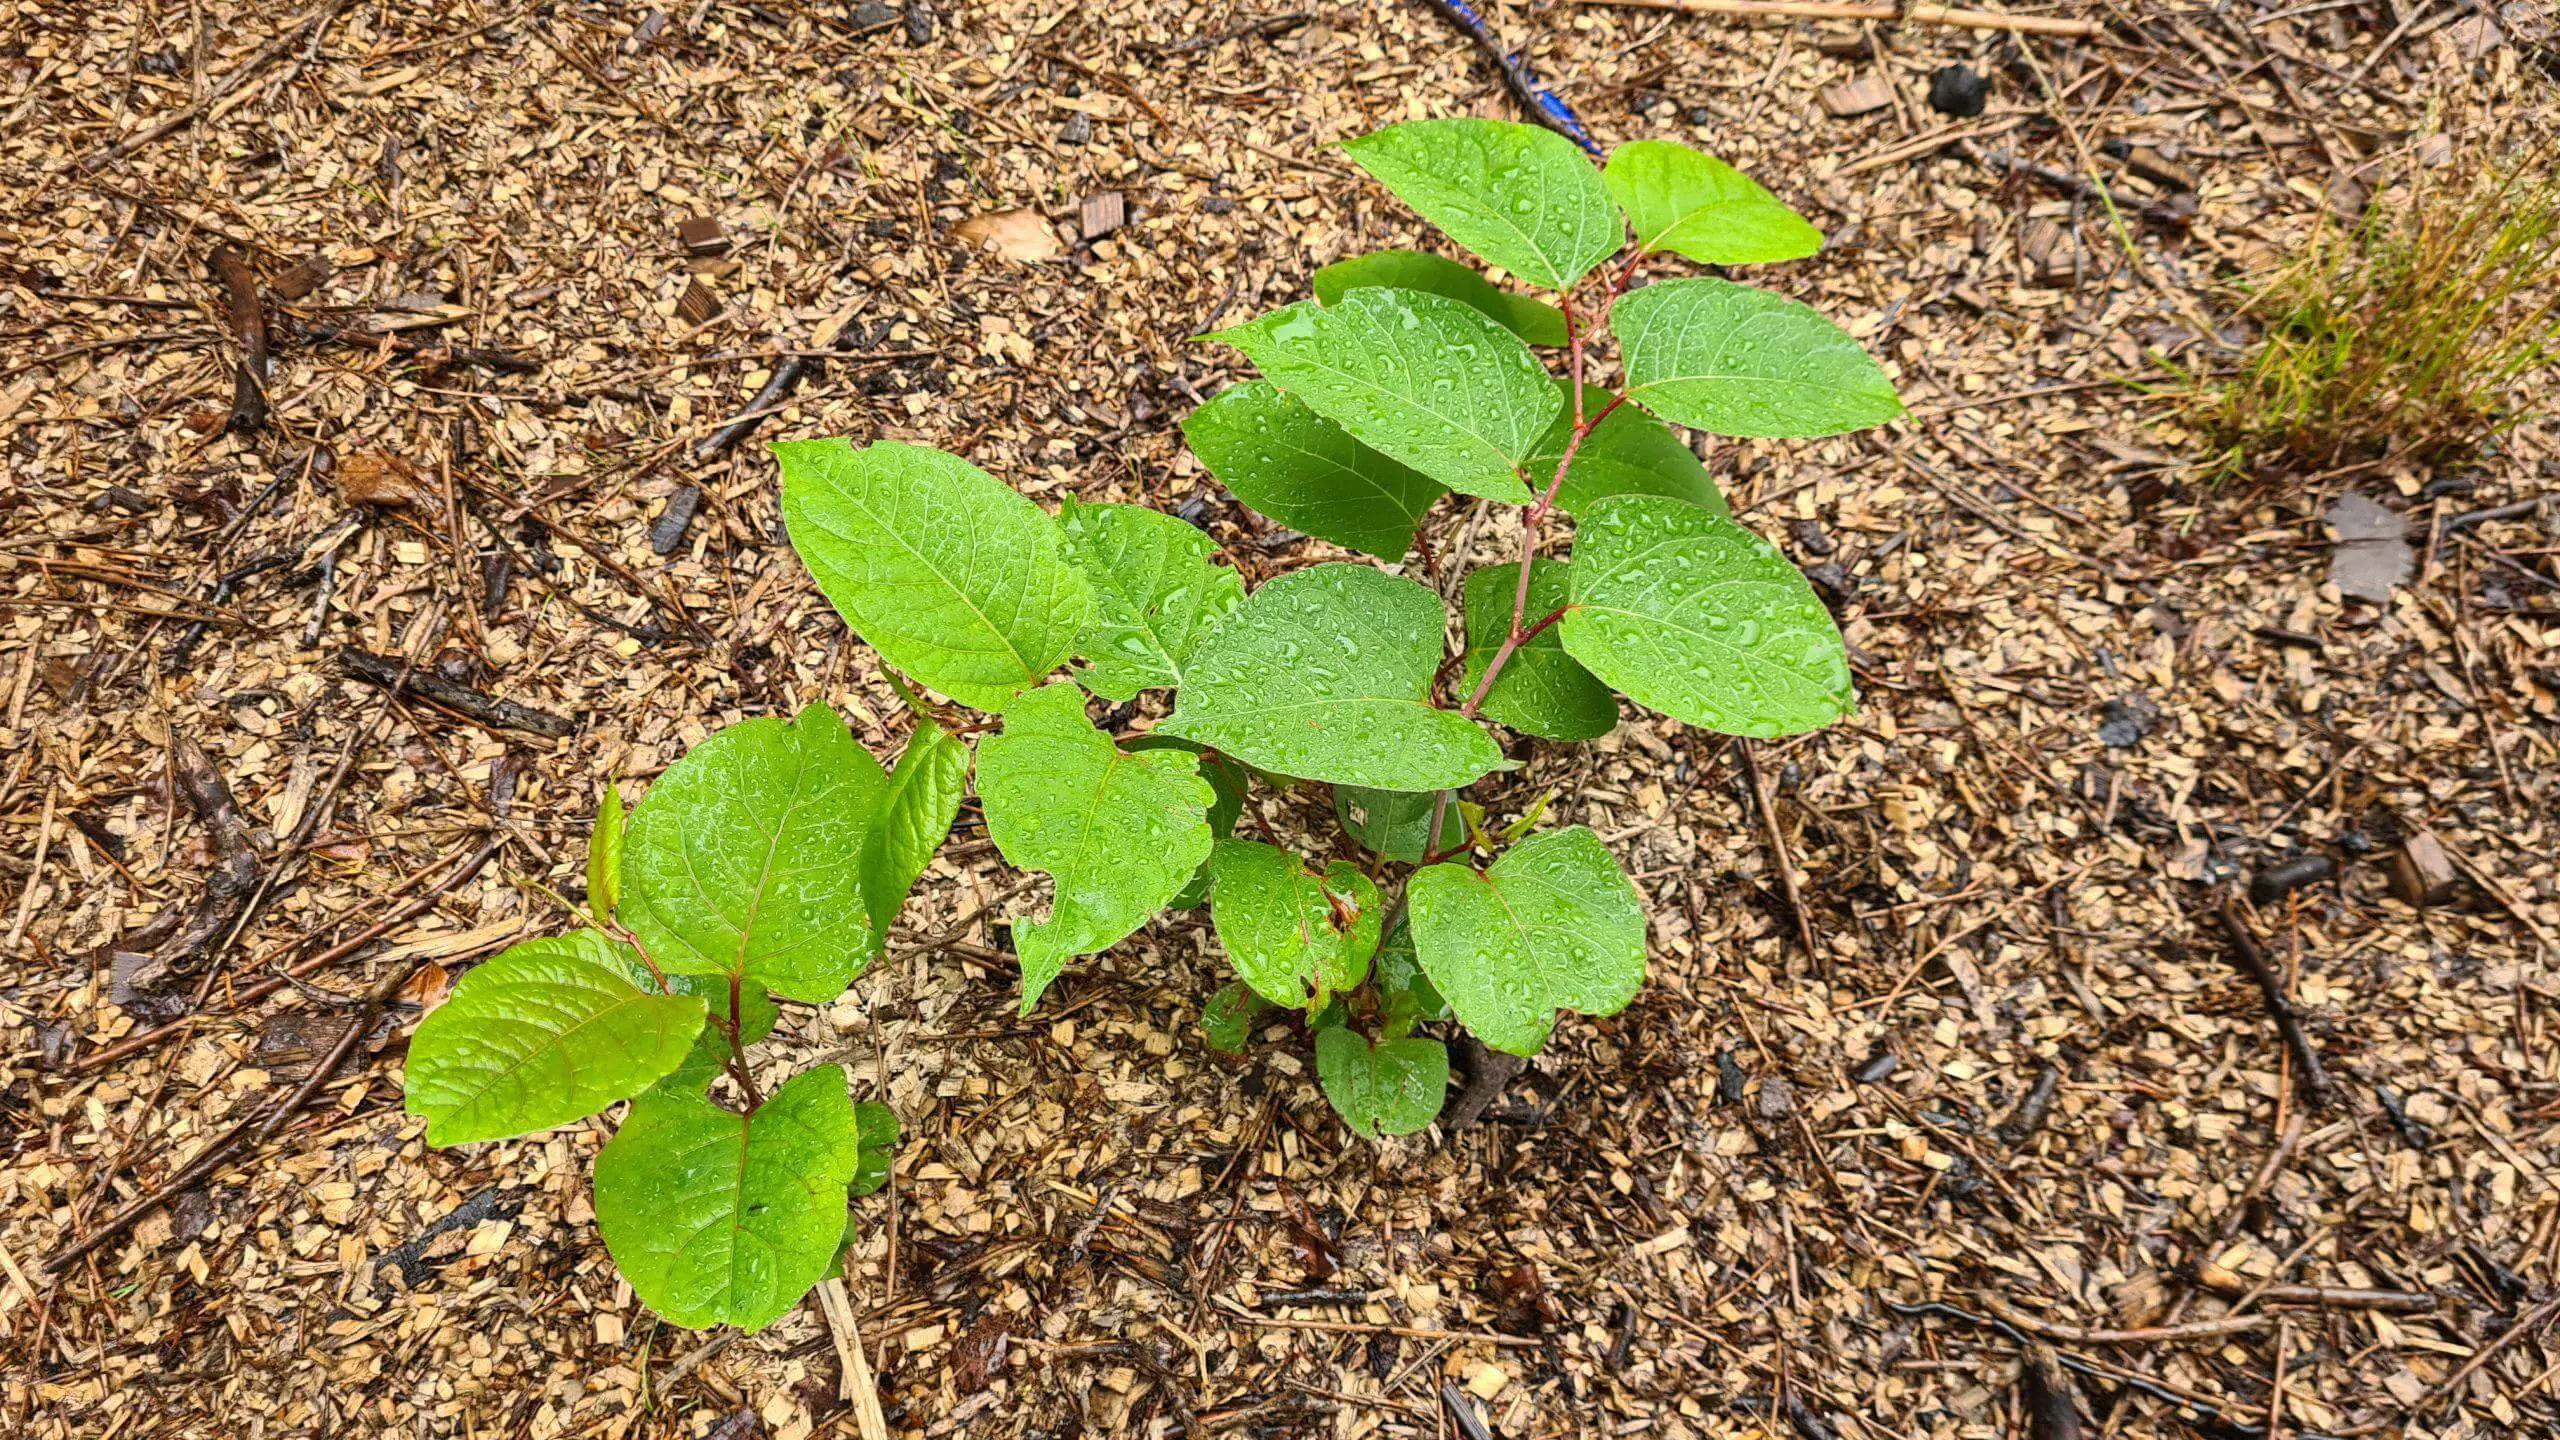 Since Japanese Knotweed was introduced into the UK it has become widespread across the UK scaled